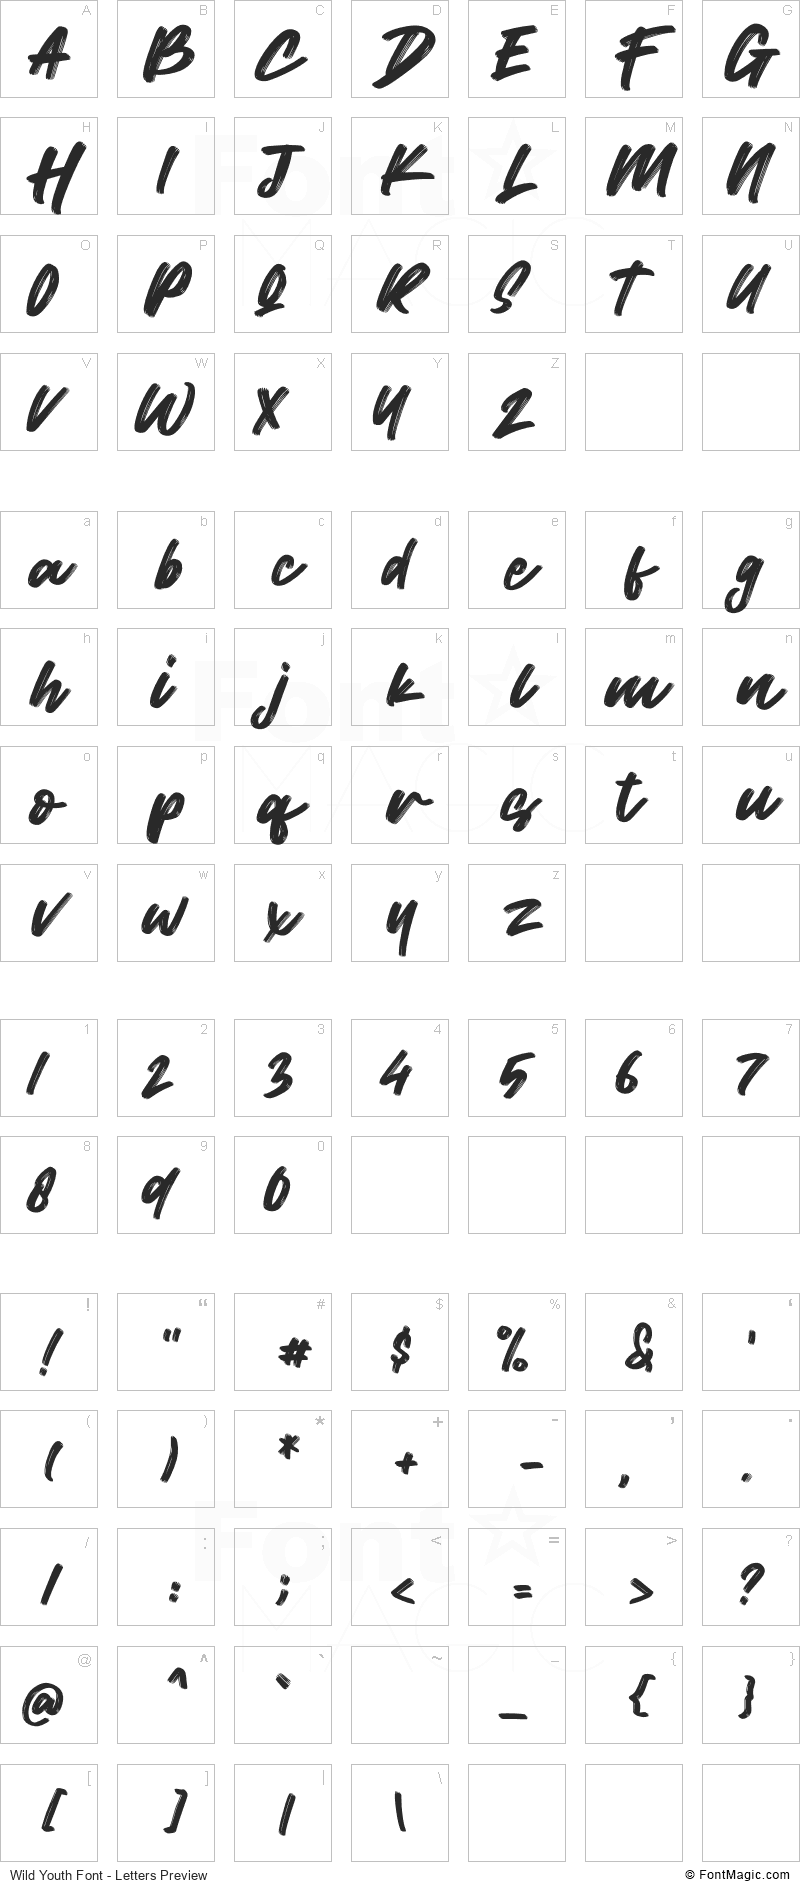 Wild Youth Font - All Latters Preview Chart